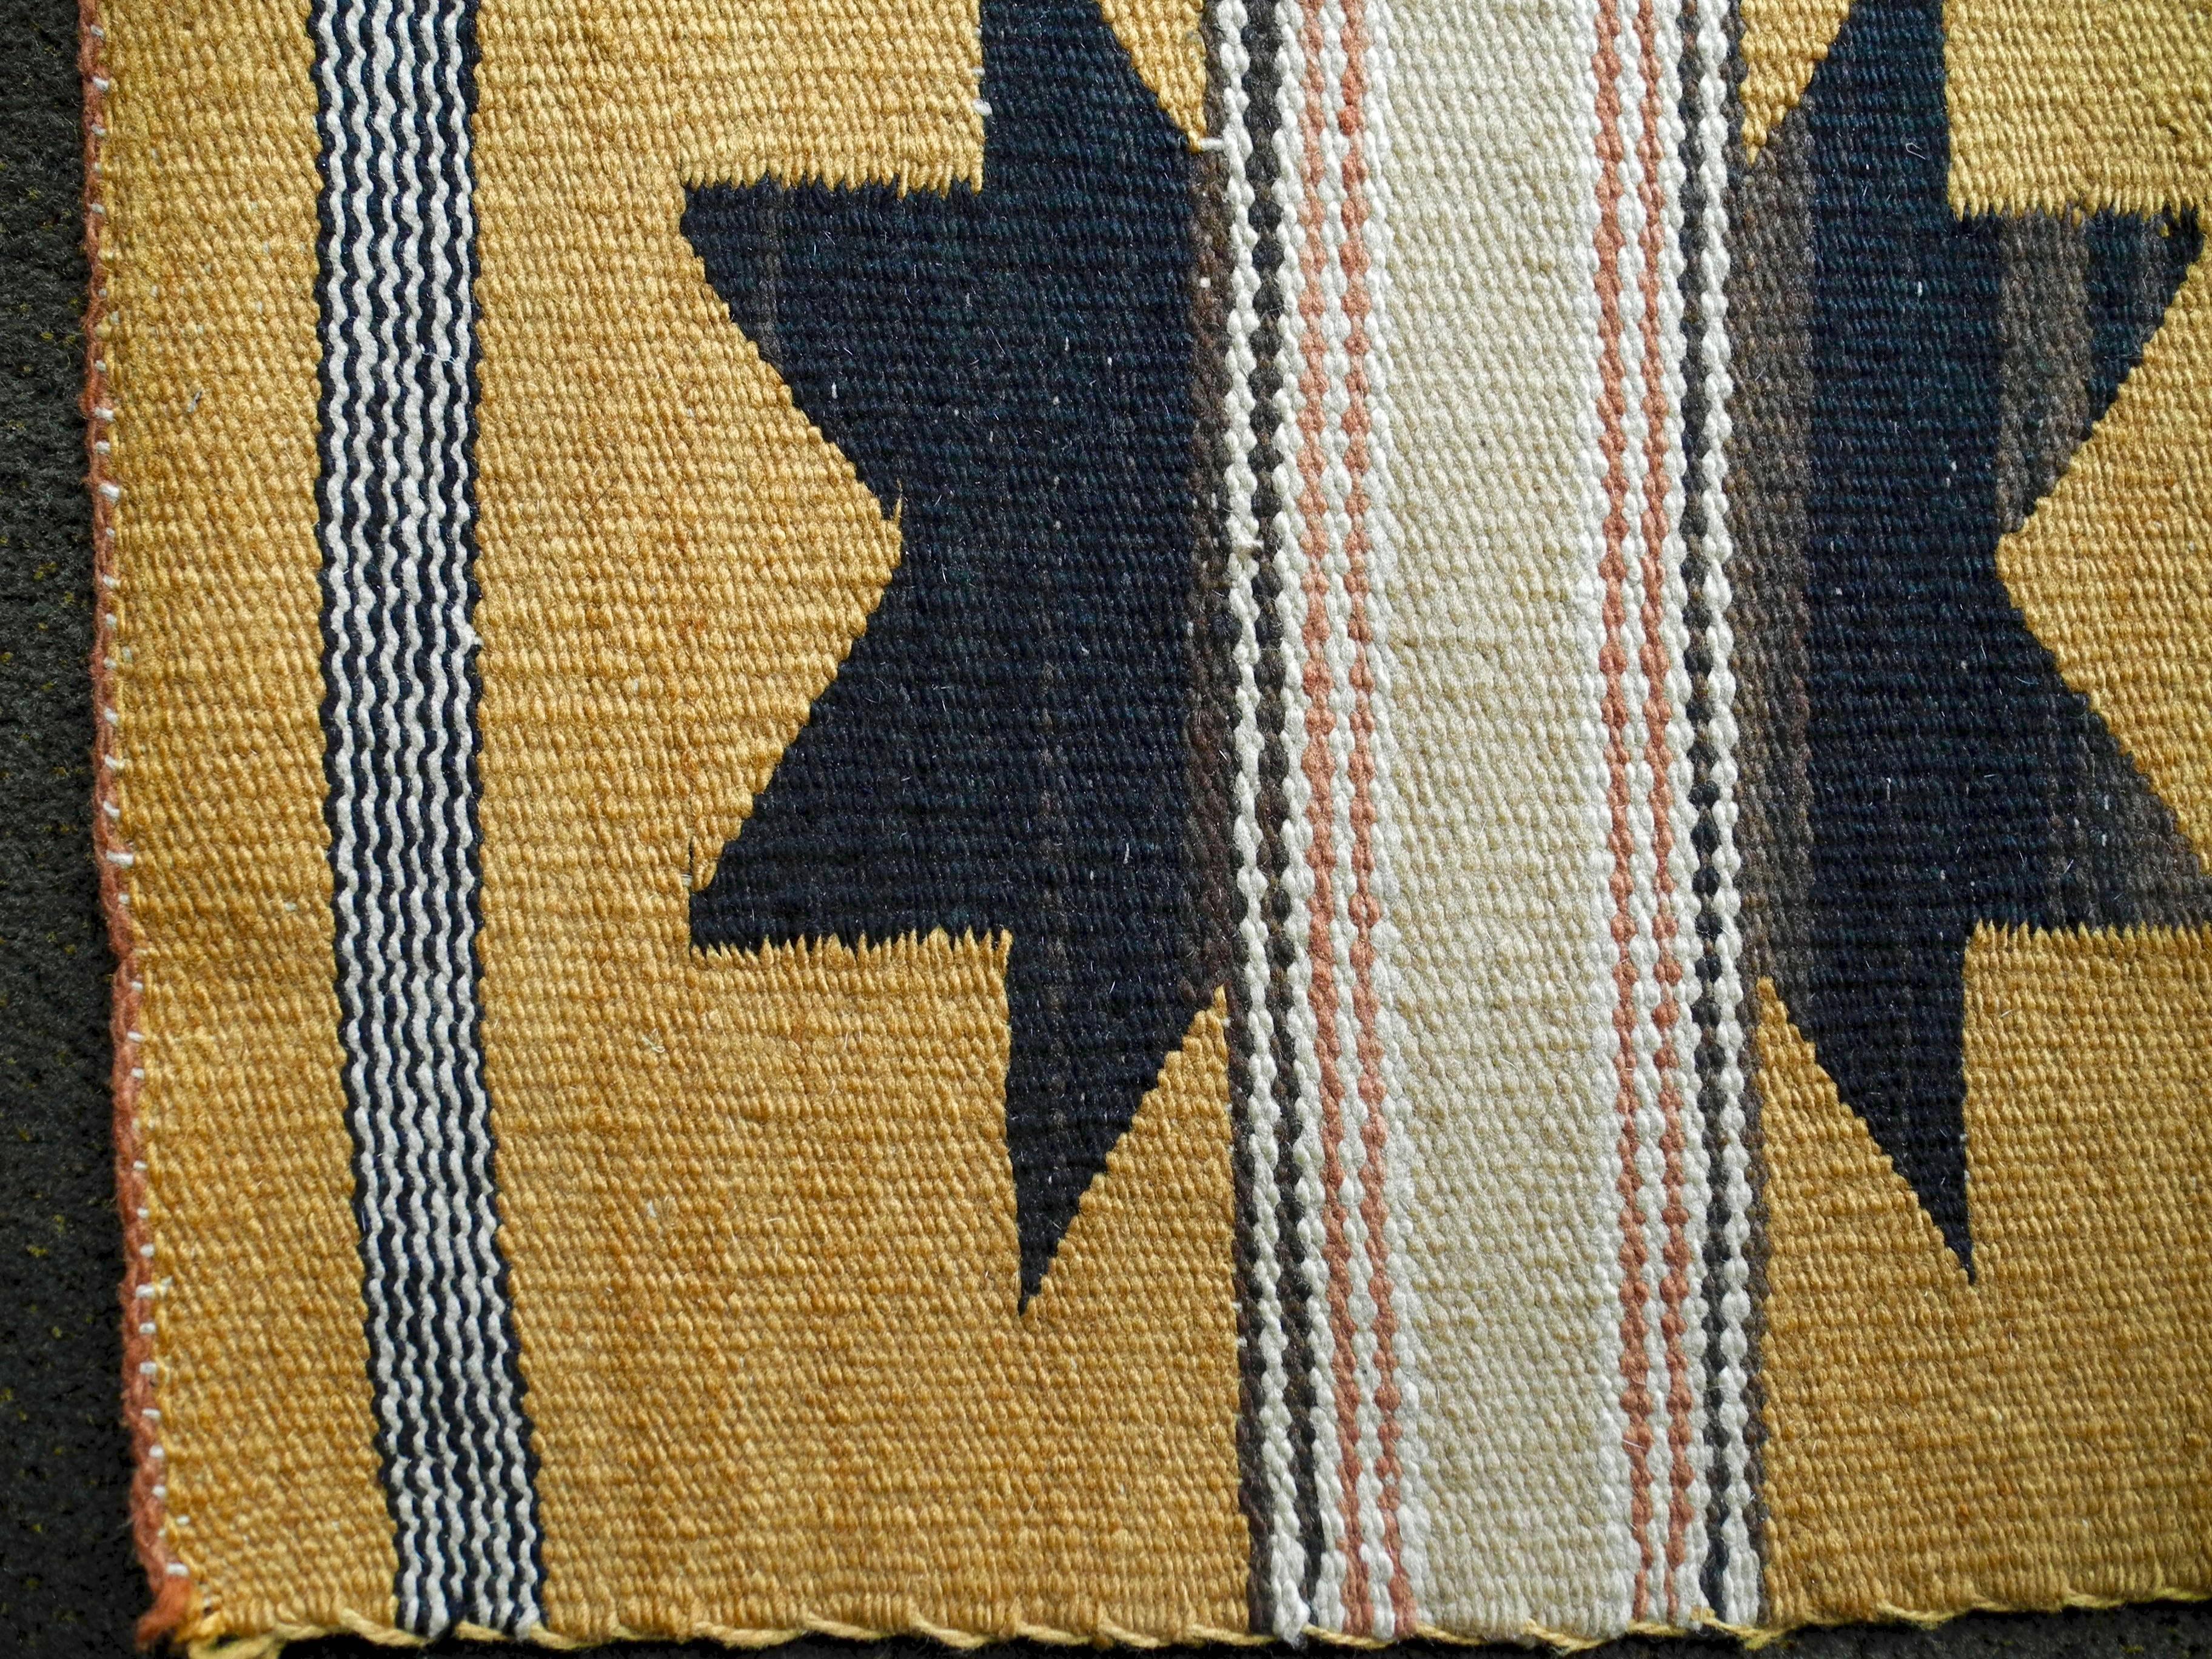 Hand-Woven Handwoven Native American Navajo Wool Rug, 1930s For Sale